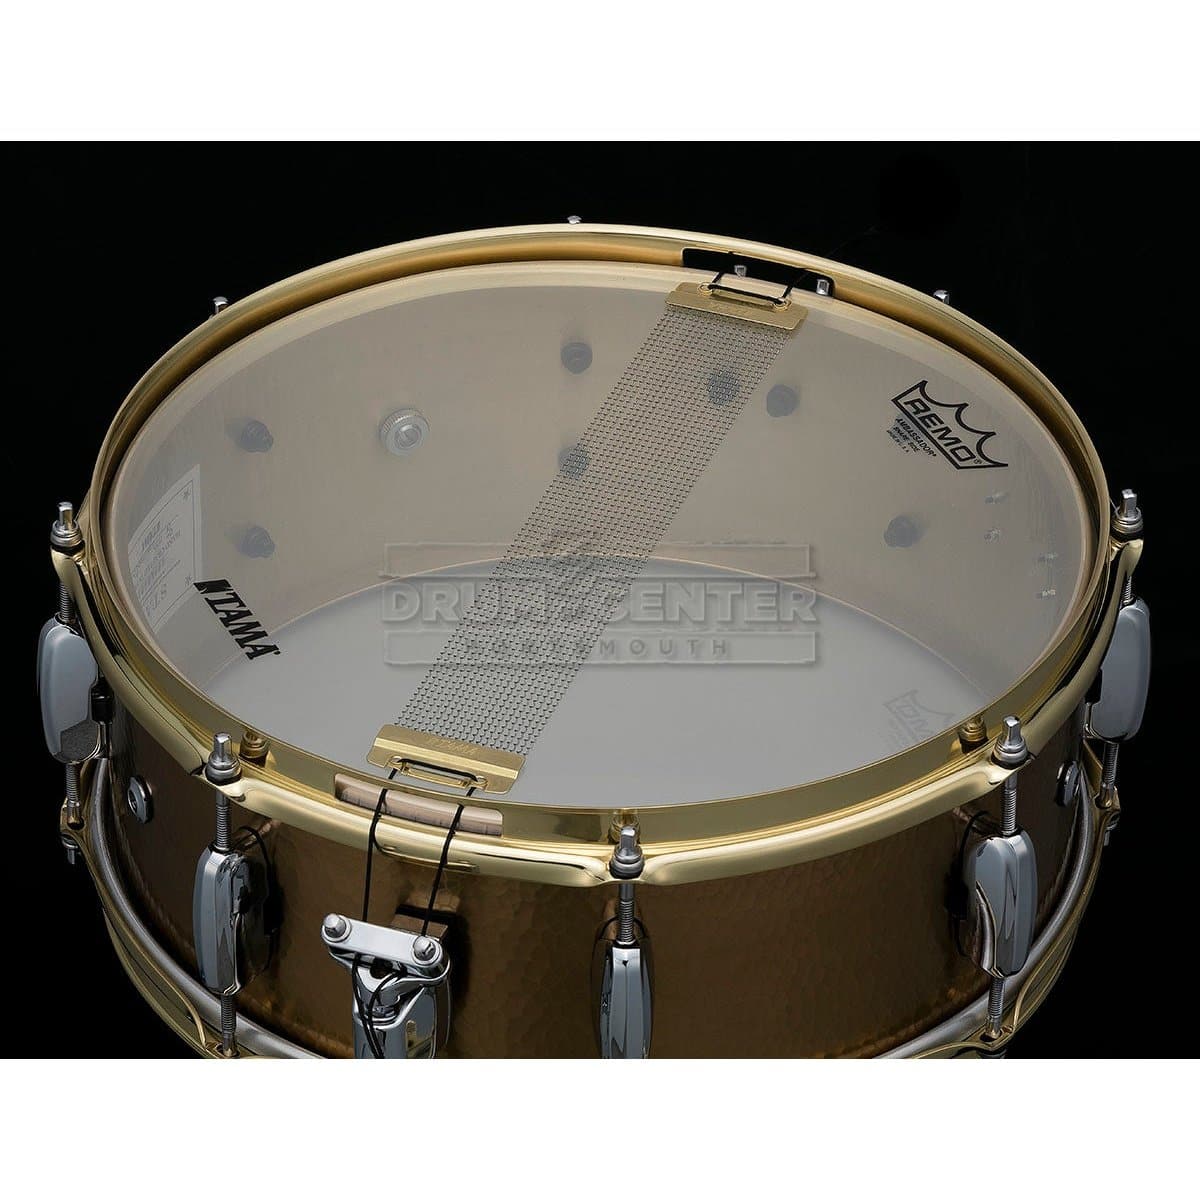 Tama Star Reserve Hand Hammered Brass Snare Drum - 5.5 x 14-inch - Natural